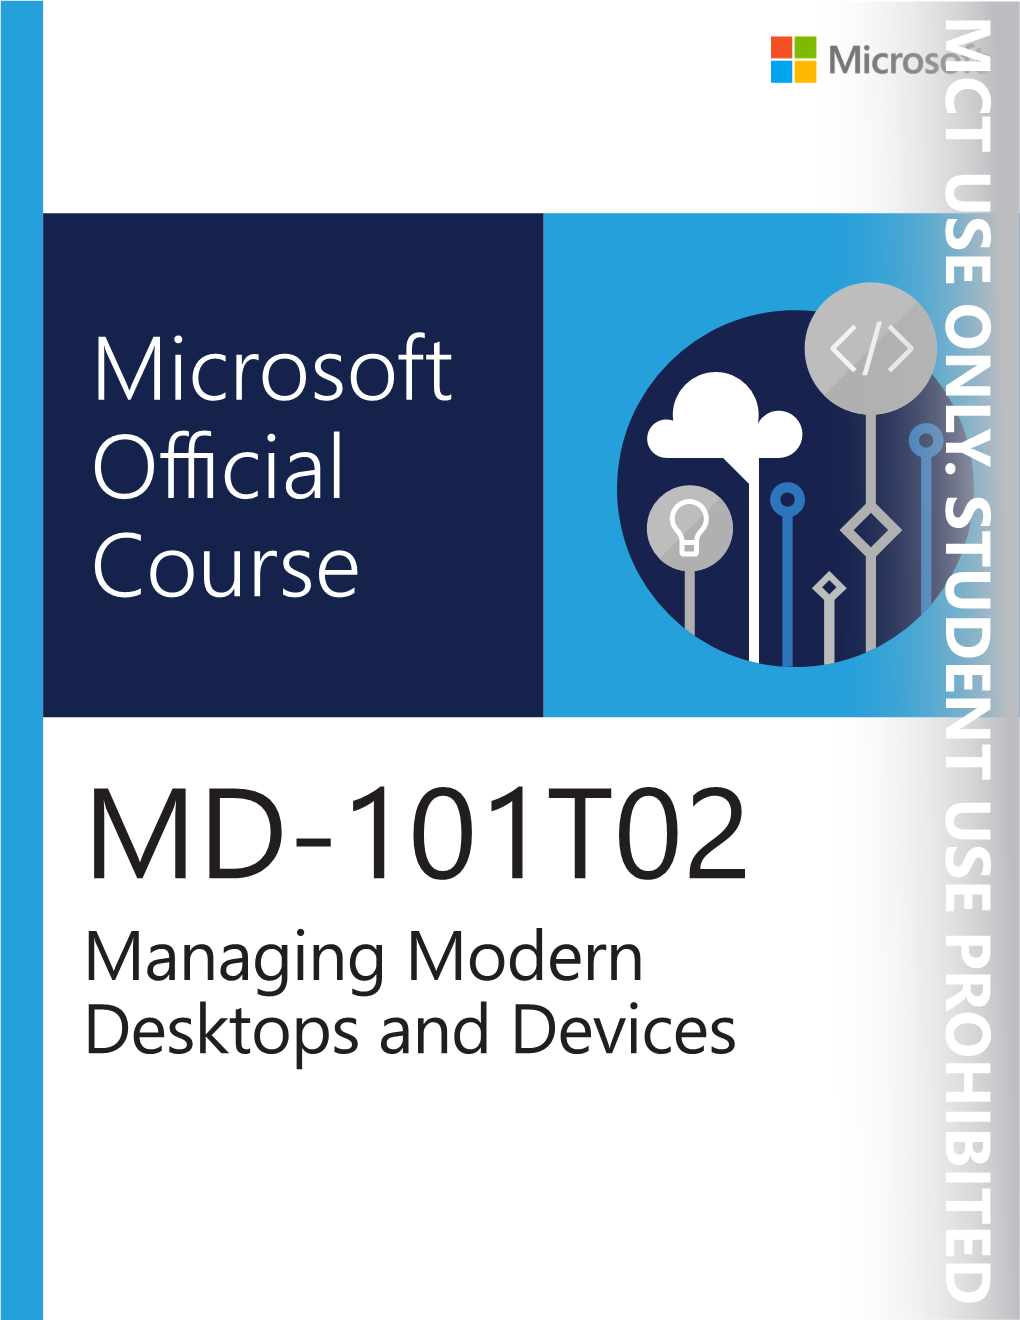 Microsoft Official Course